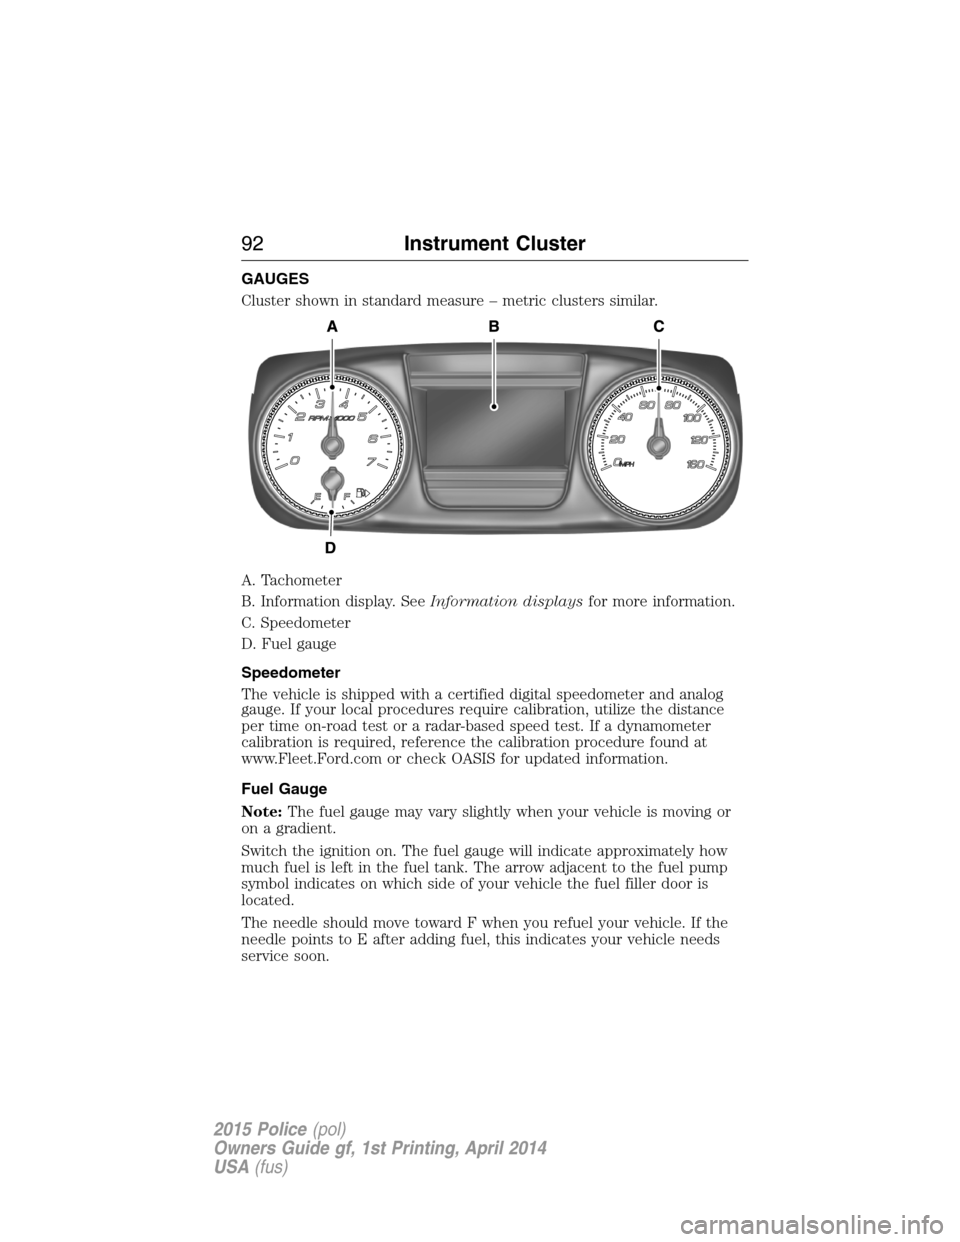 FORD POLICE INTERCEPTOR UTILITY 2015 1.G Owners Manual GAUGES
Cluster shown in standard measure – metric clusters similar.
A. Tachometer
B. Information display. SeeInformation displaysfor more information.
C. Speedometer
D. Fuel gauge
Speedometer
The ve